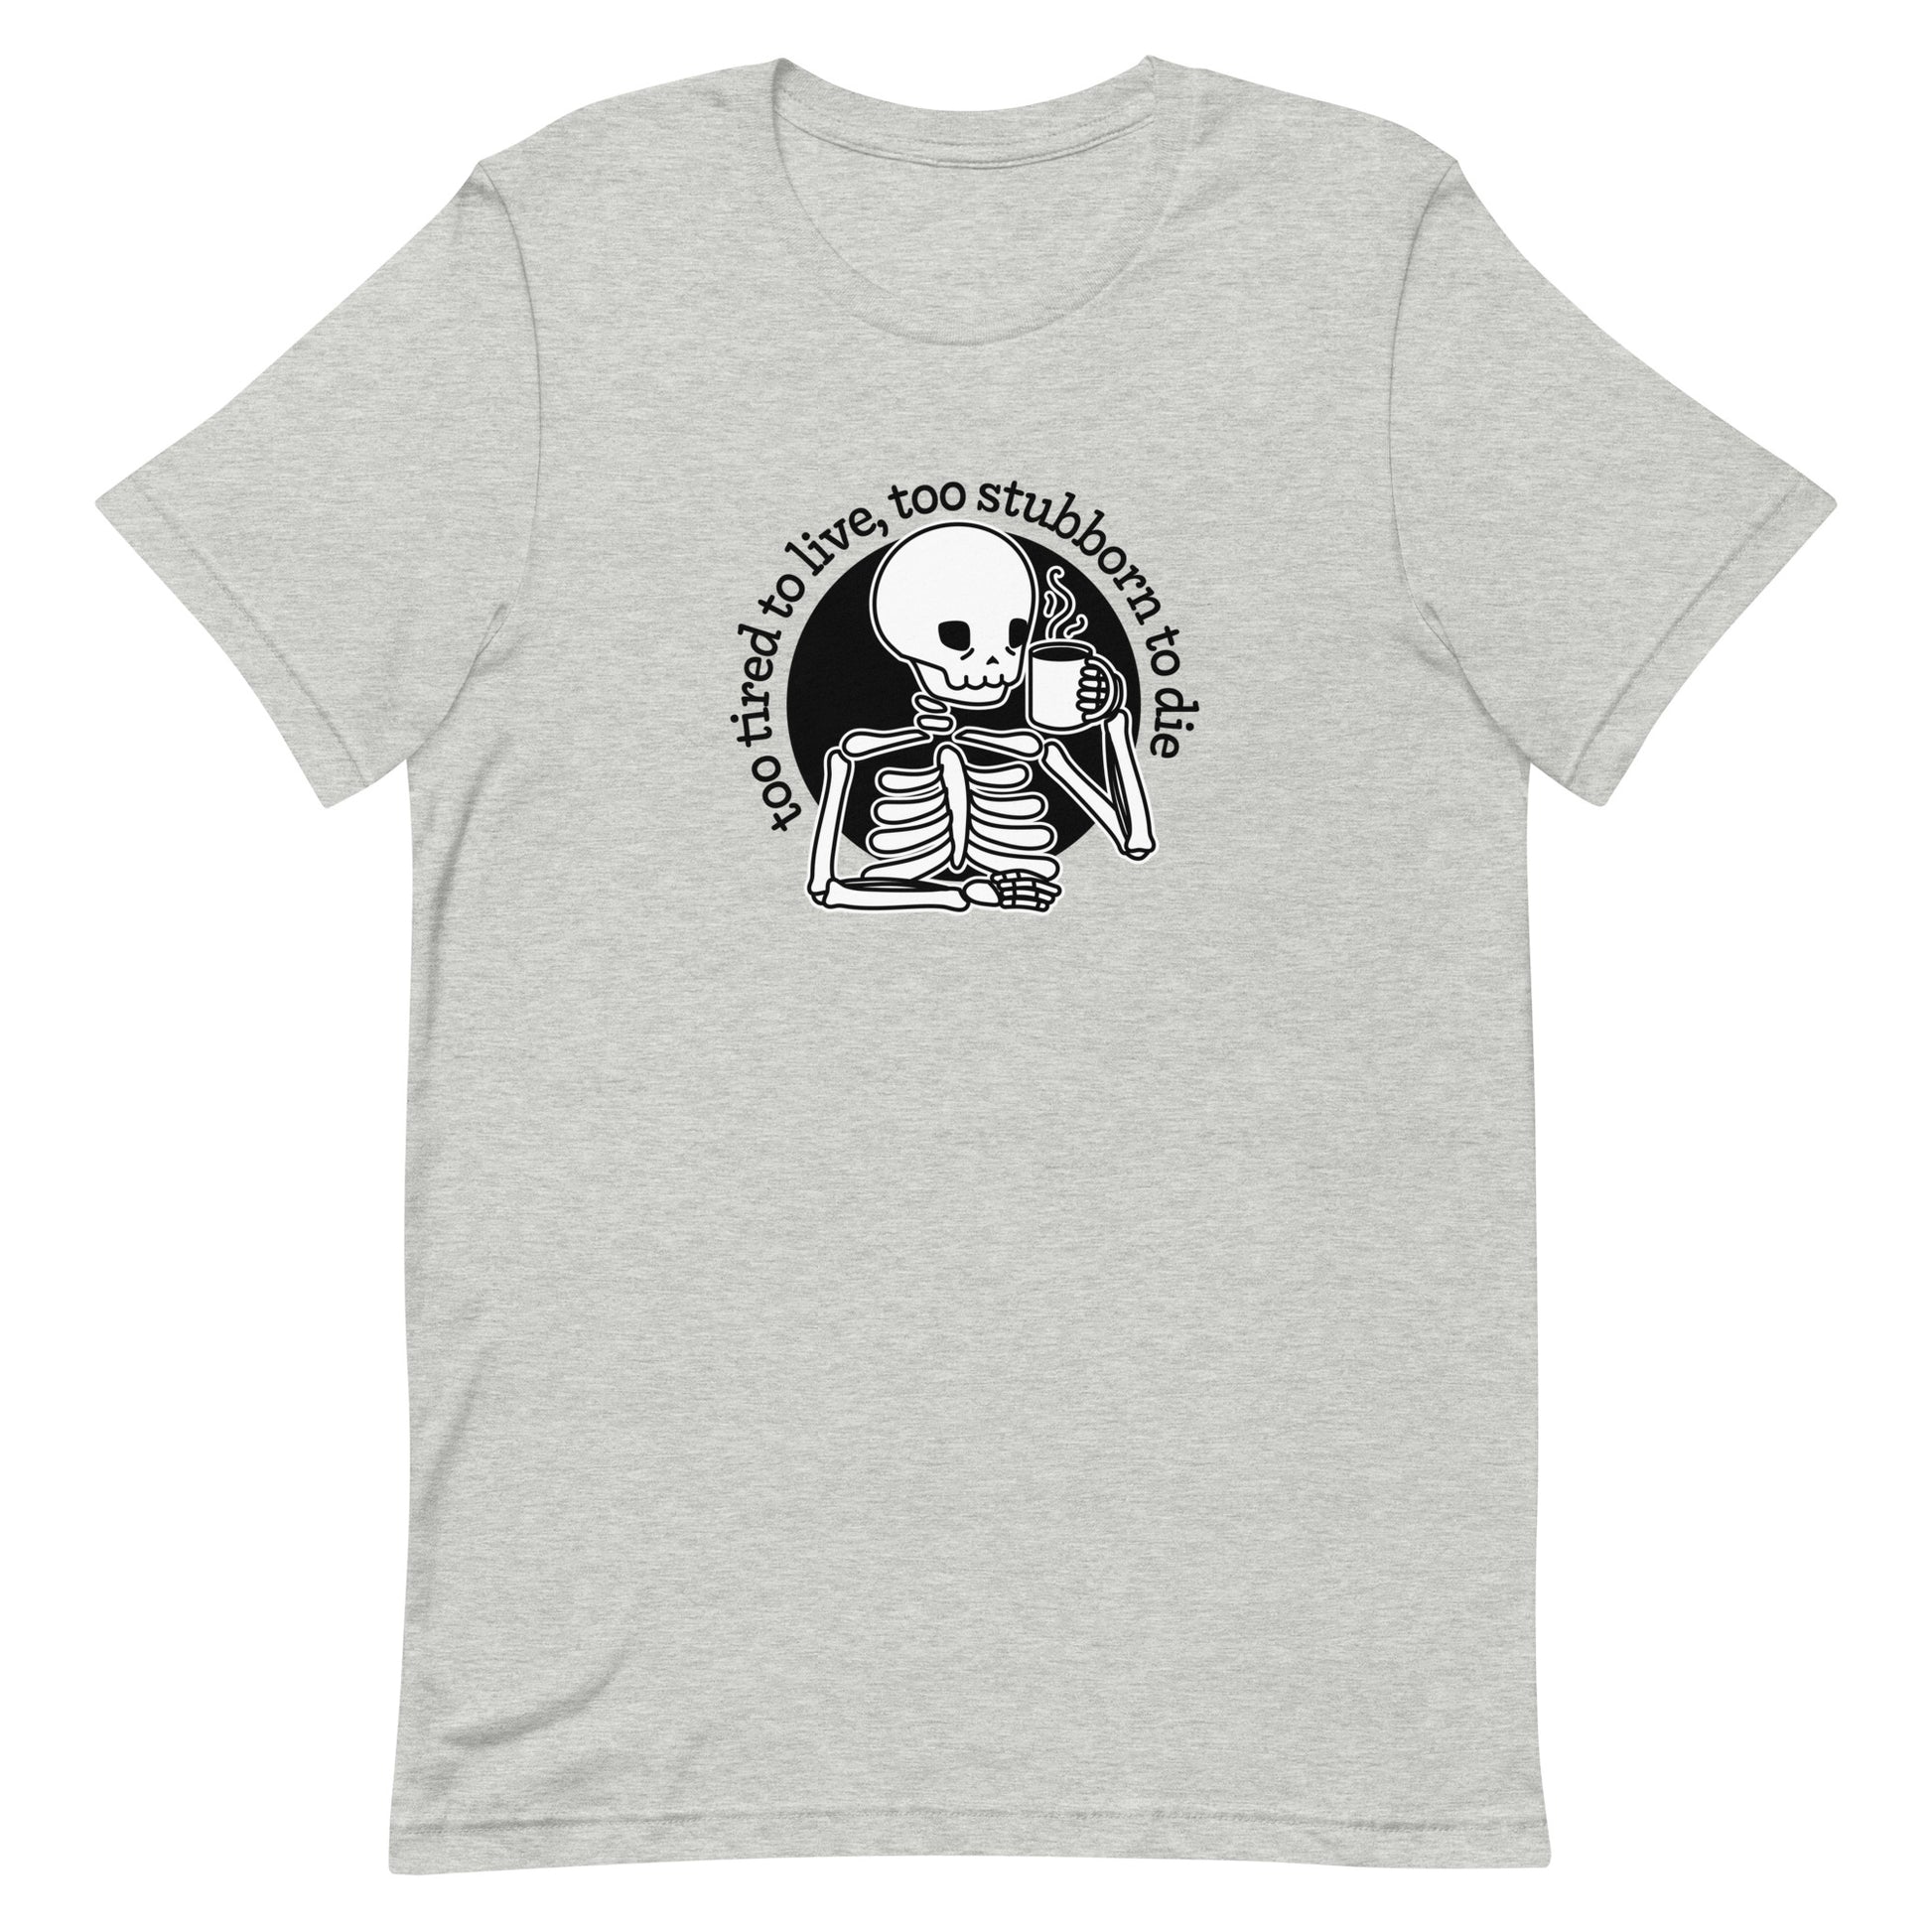 A grey crewneck t-shirt featuring a tired-looking skeleton holding a steaming mug. Text in an arc above the skeleton reads "too tired to live, too stubborn to die".